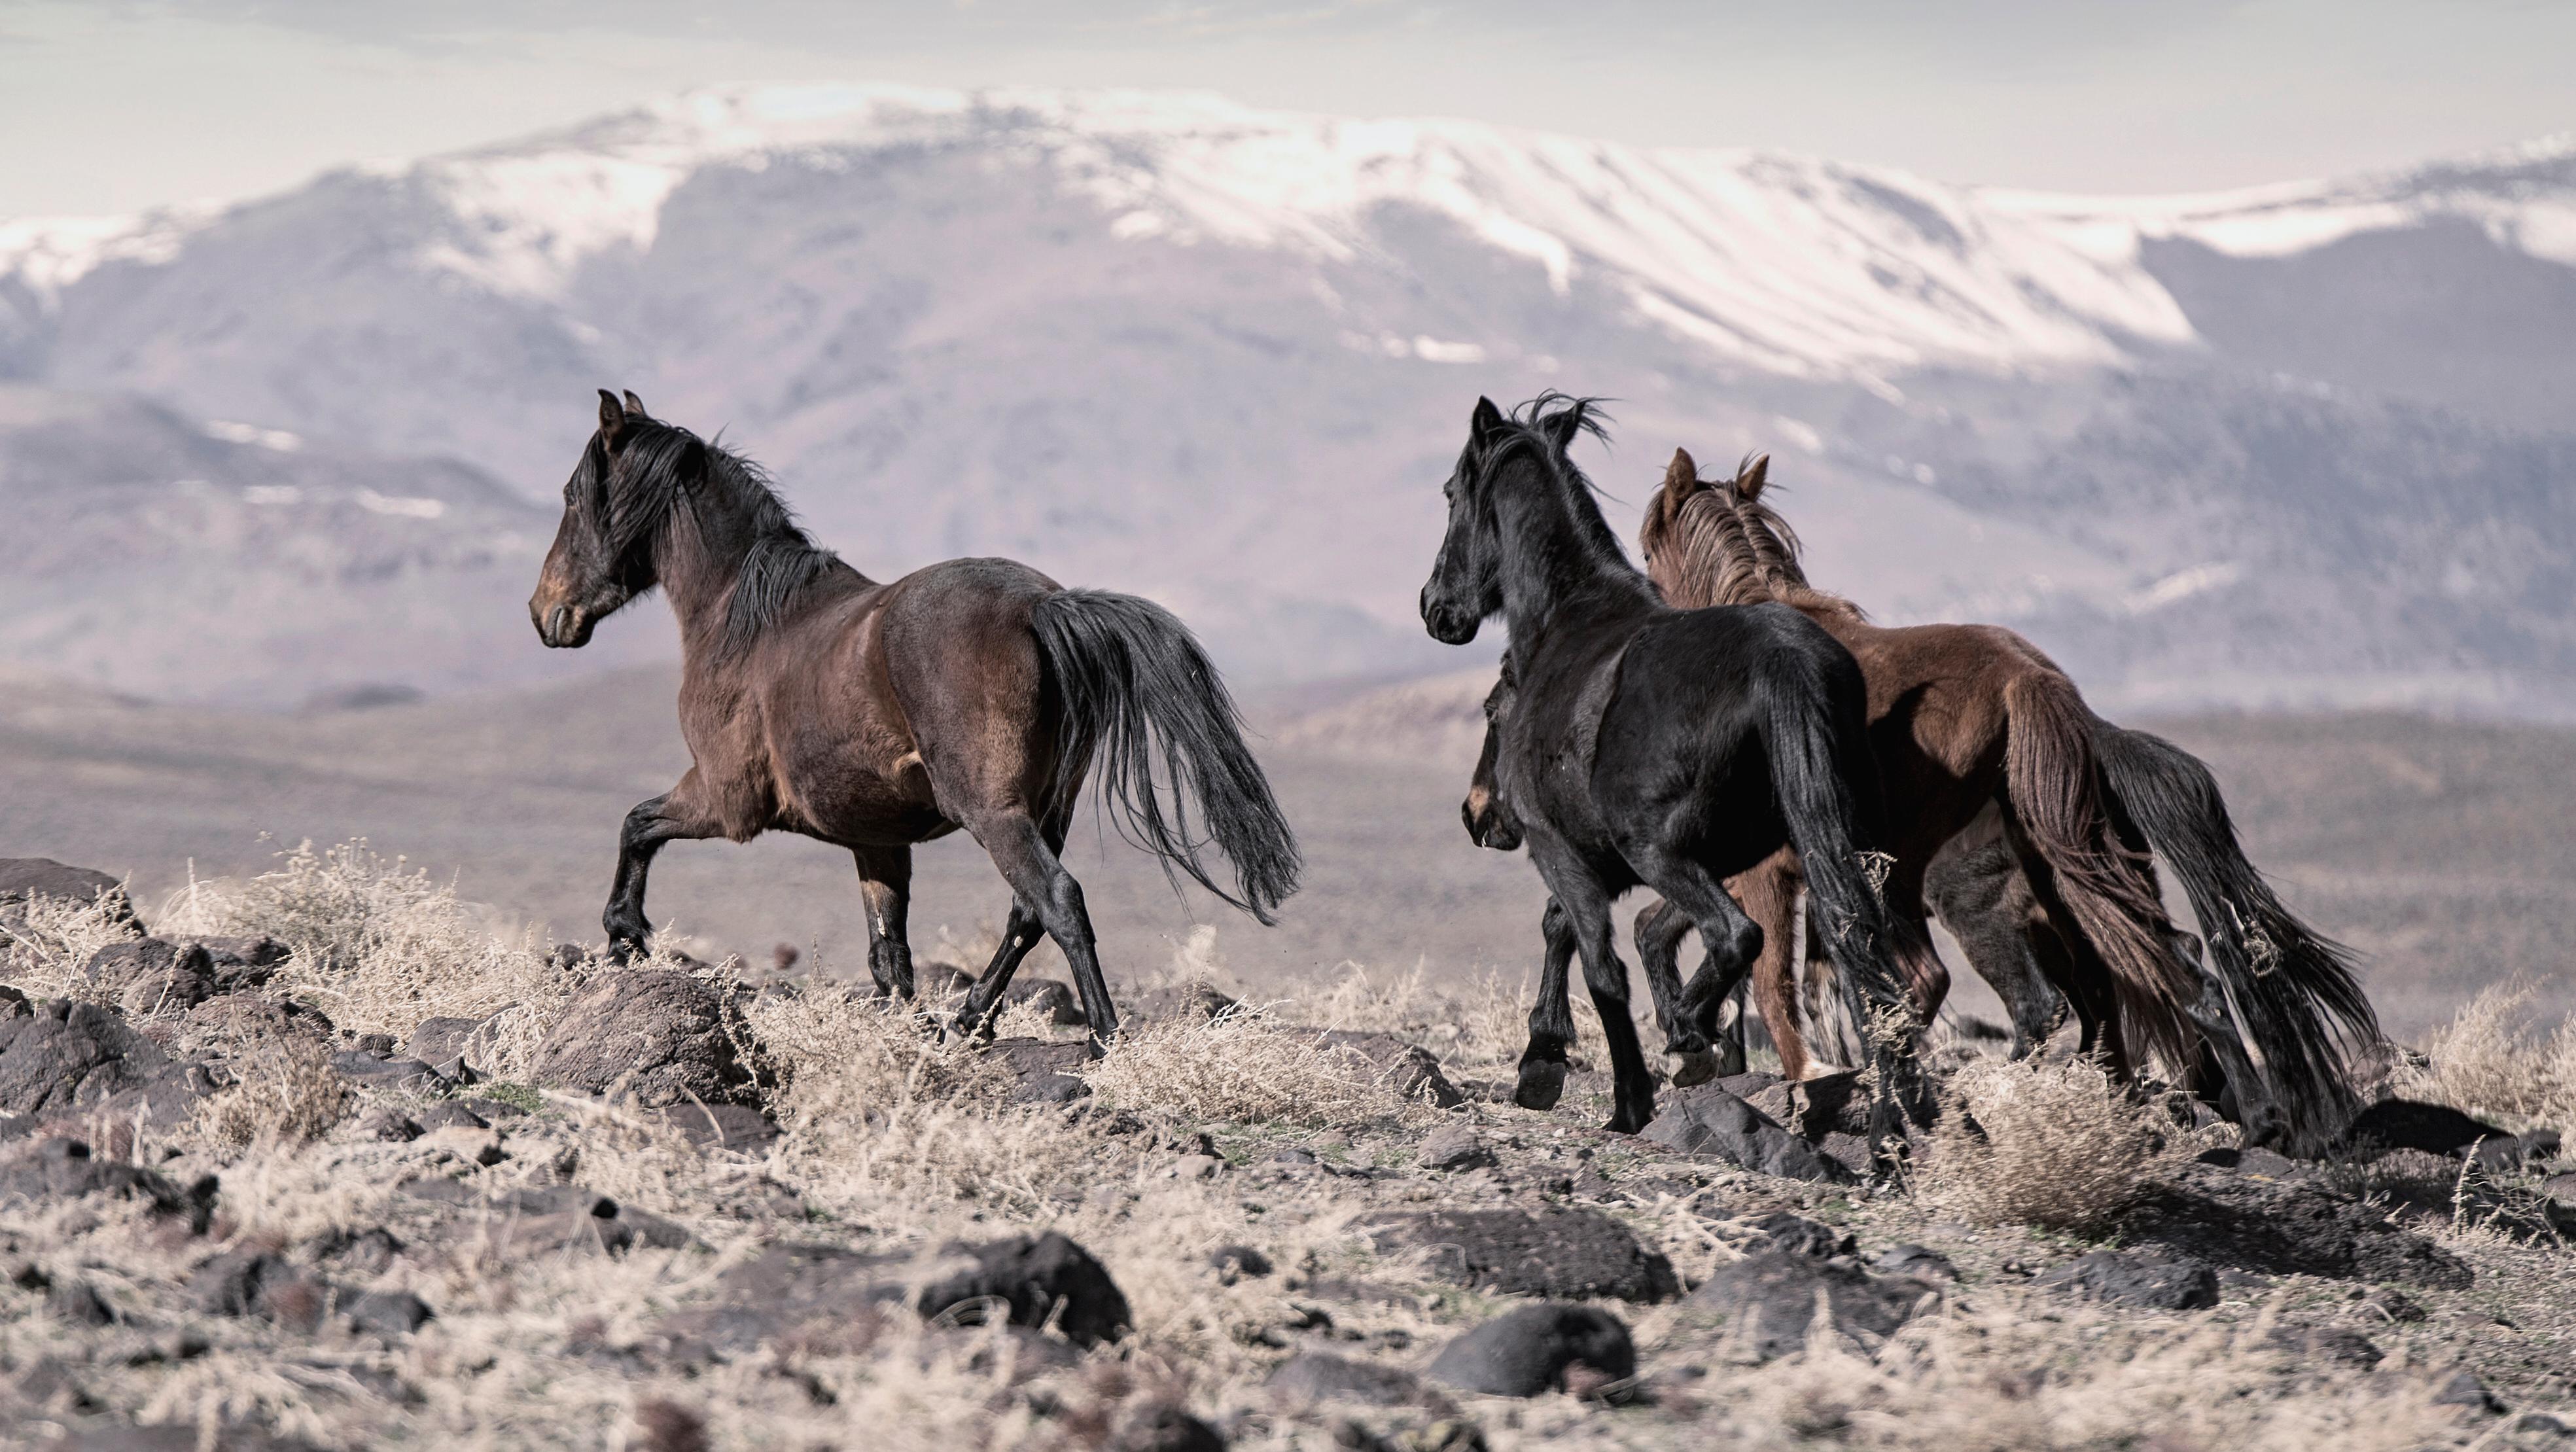 Wild Mustangs just Carson Nevada 
40x55  
Printed on archival paper using archival inks
Unsigned print
Framing available. Inquire for rates. 

Shane Russeck is a modern day photographer, adventurer, and explorer. He first picked up a camera while